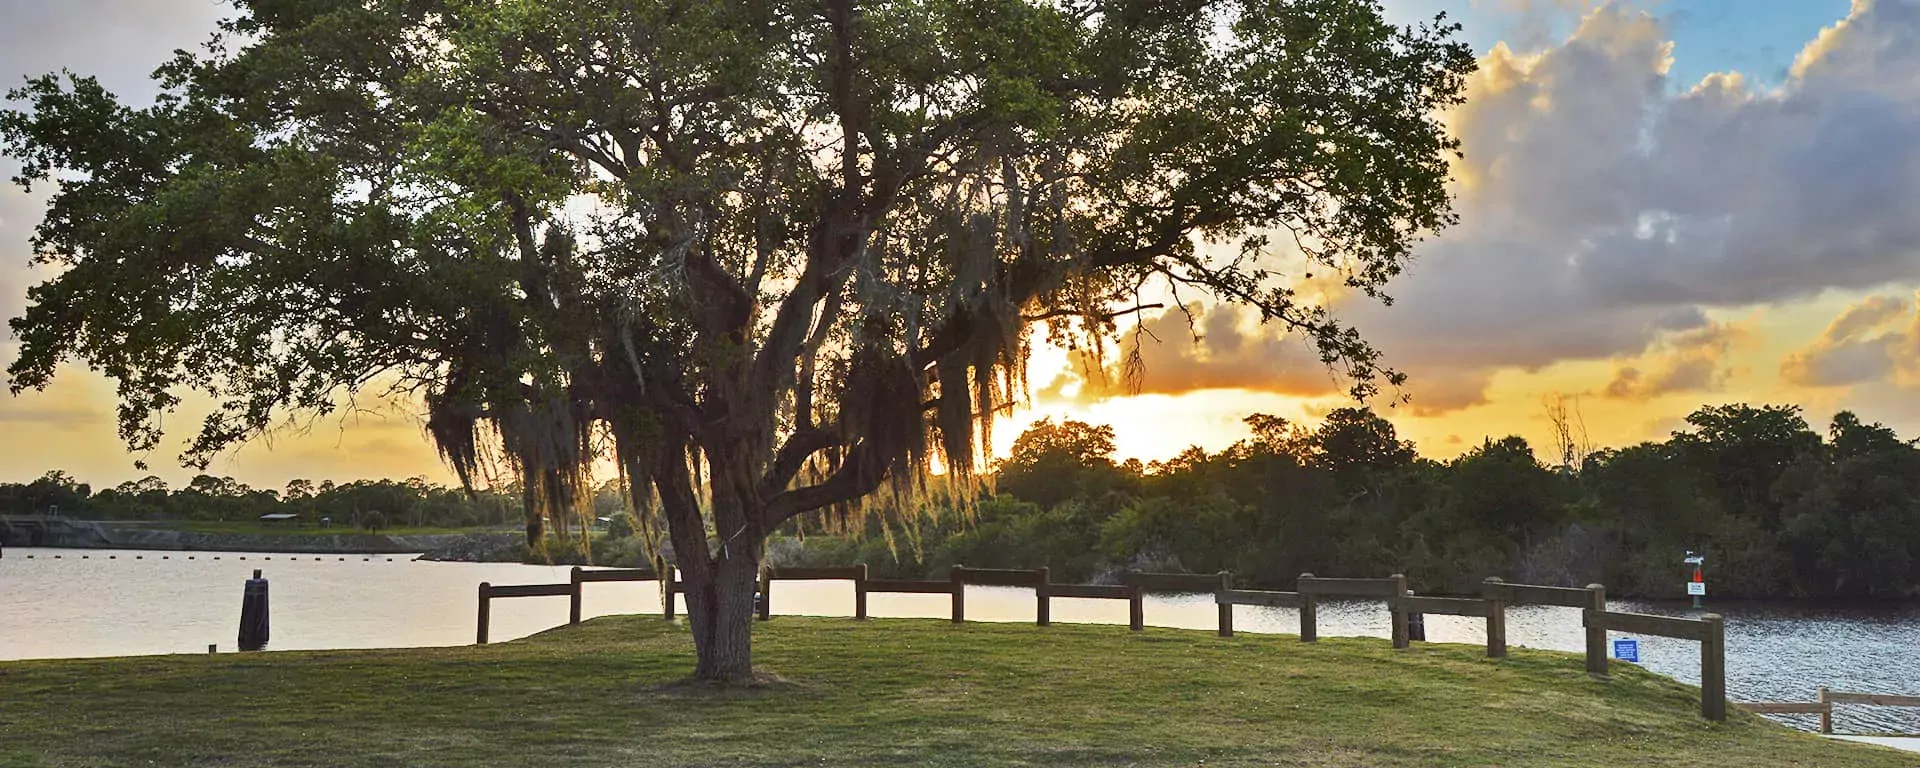 Phipps Park Campground | Martin County Florida